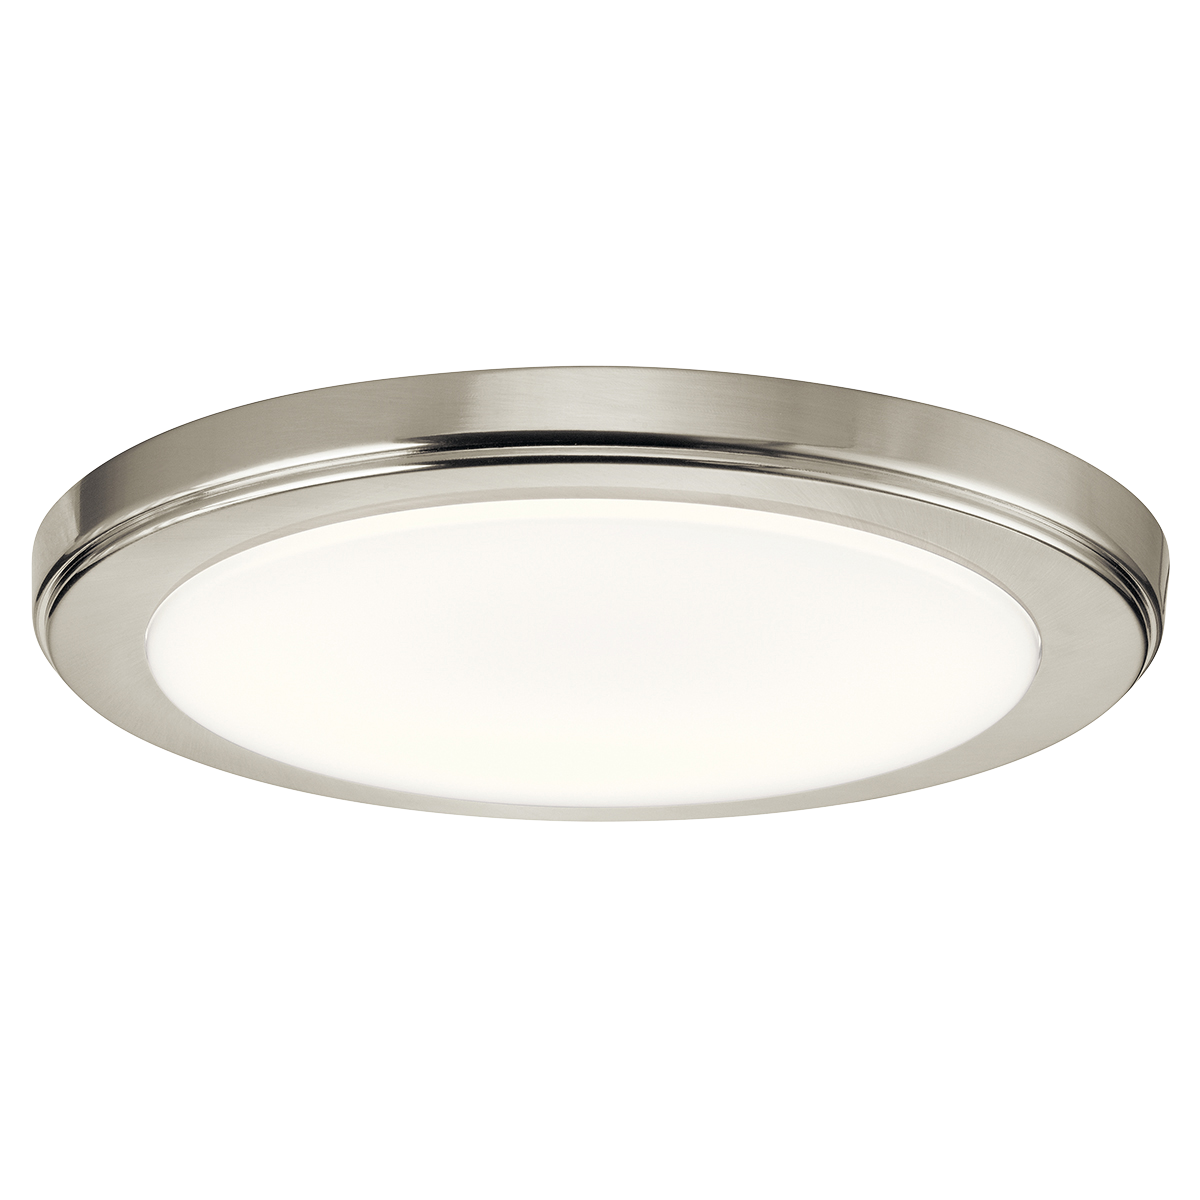 KICH 44246NILED30 Flush Mount 10 in Cooper Electric